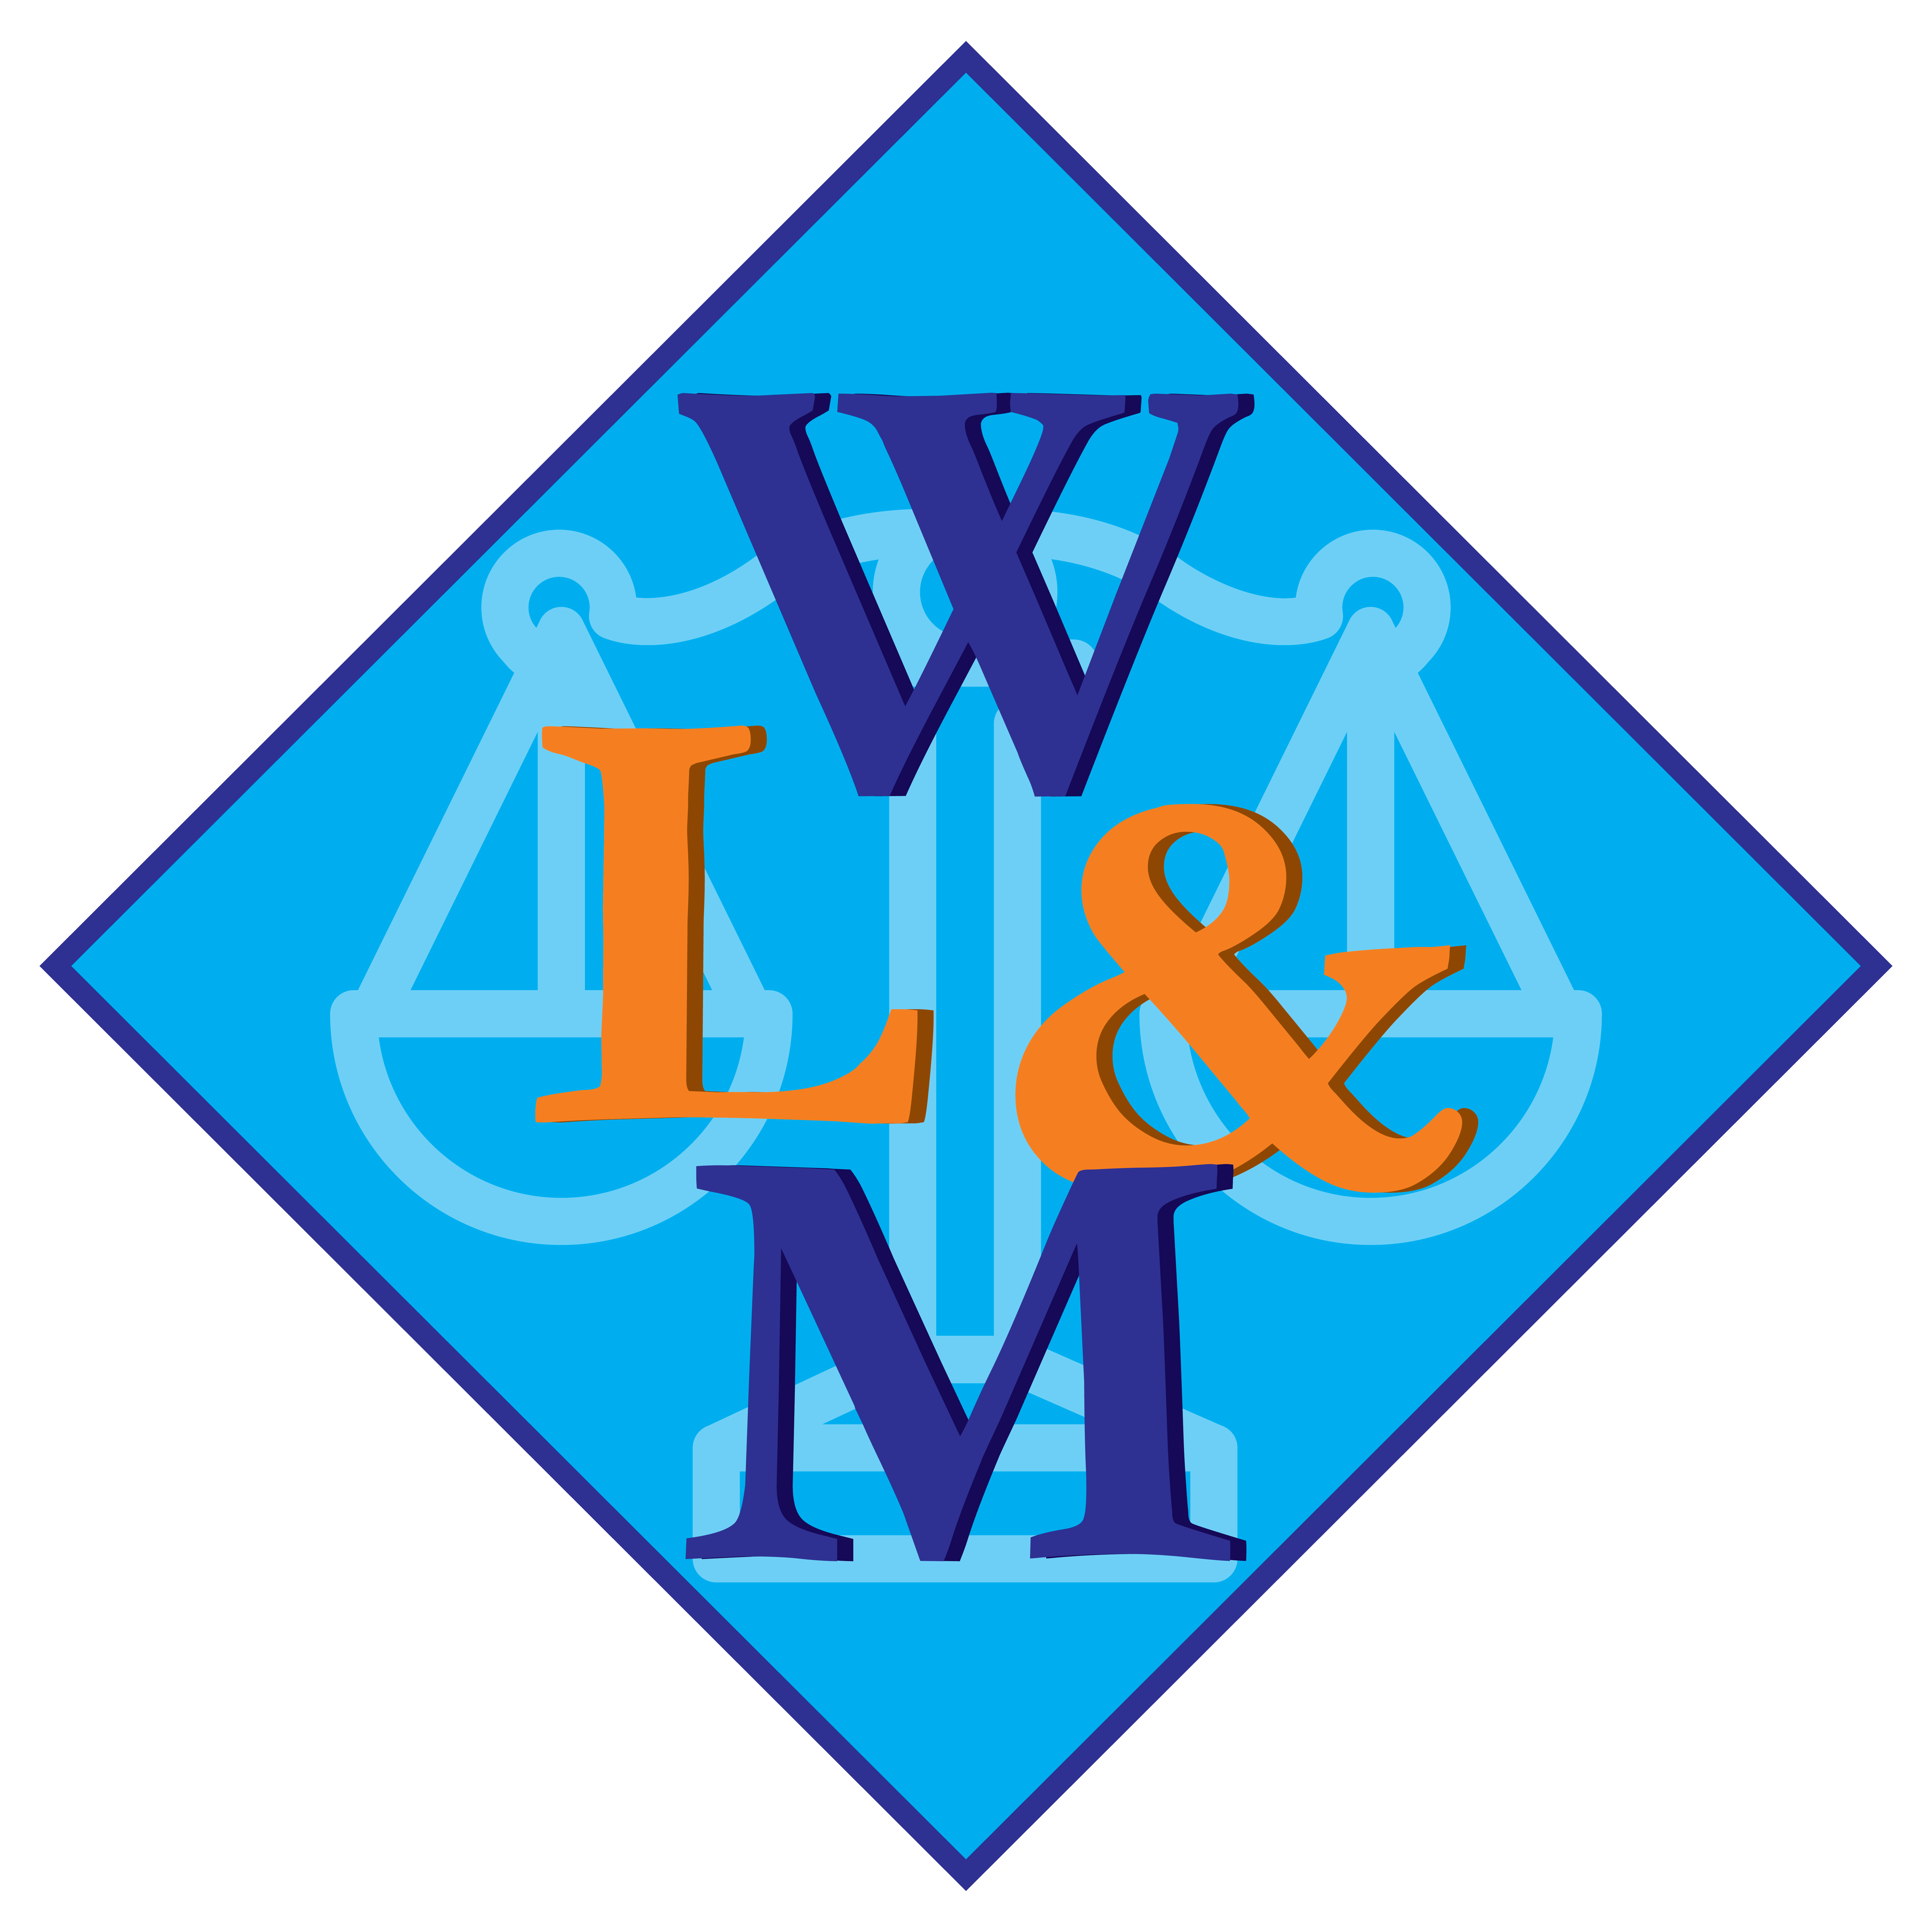 Willis Law and Mediation, PLLC